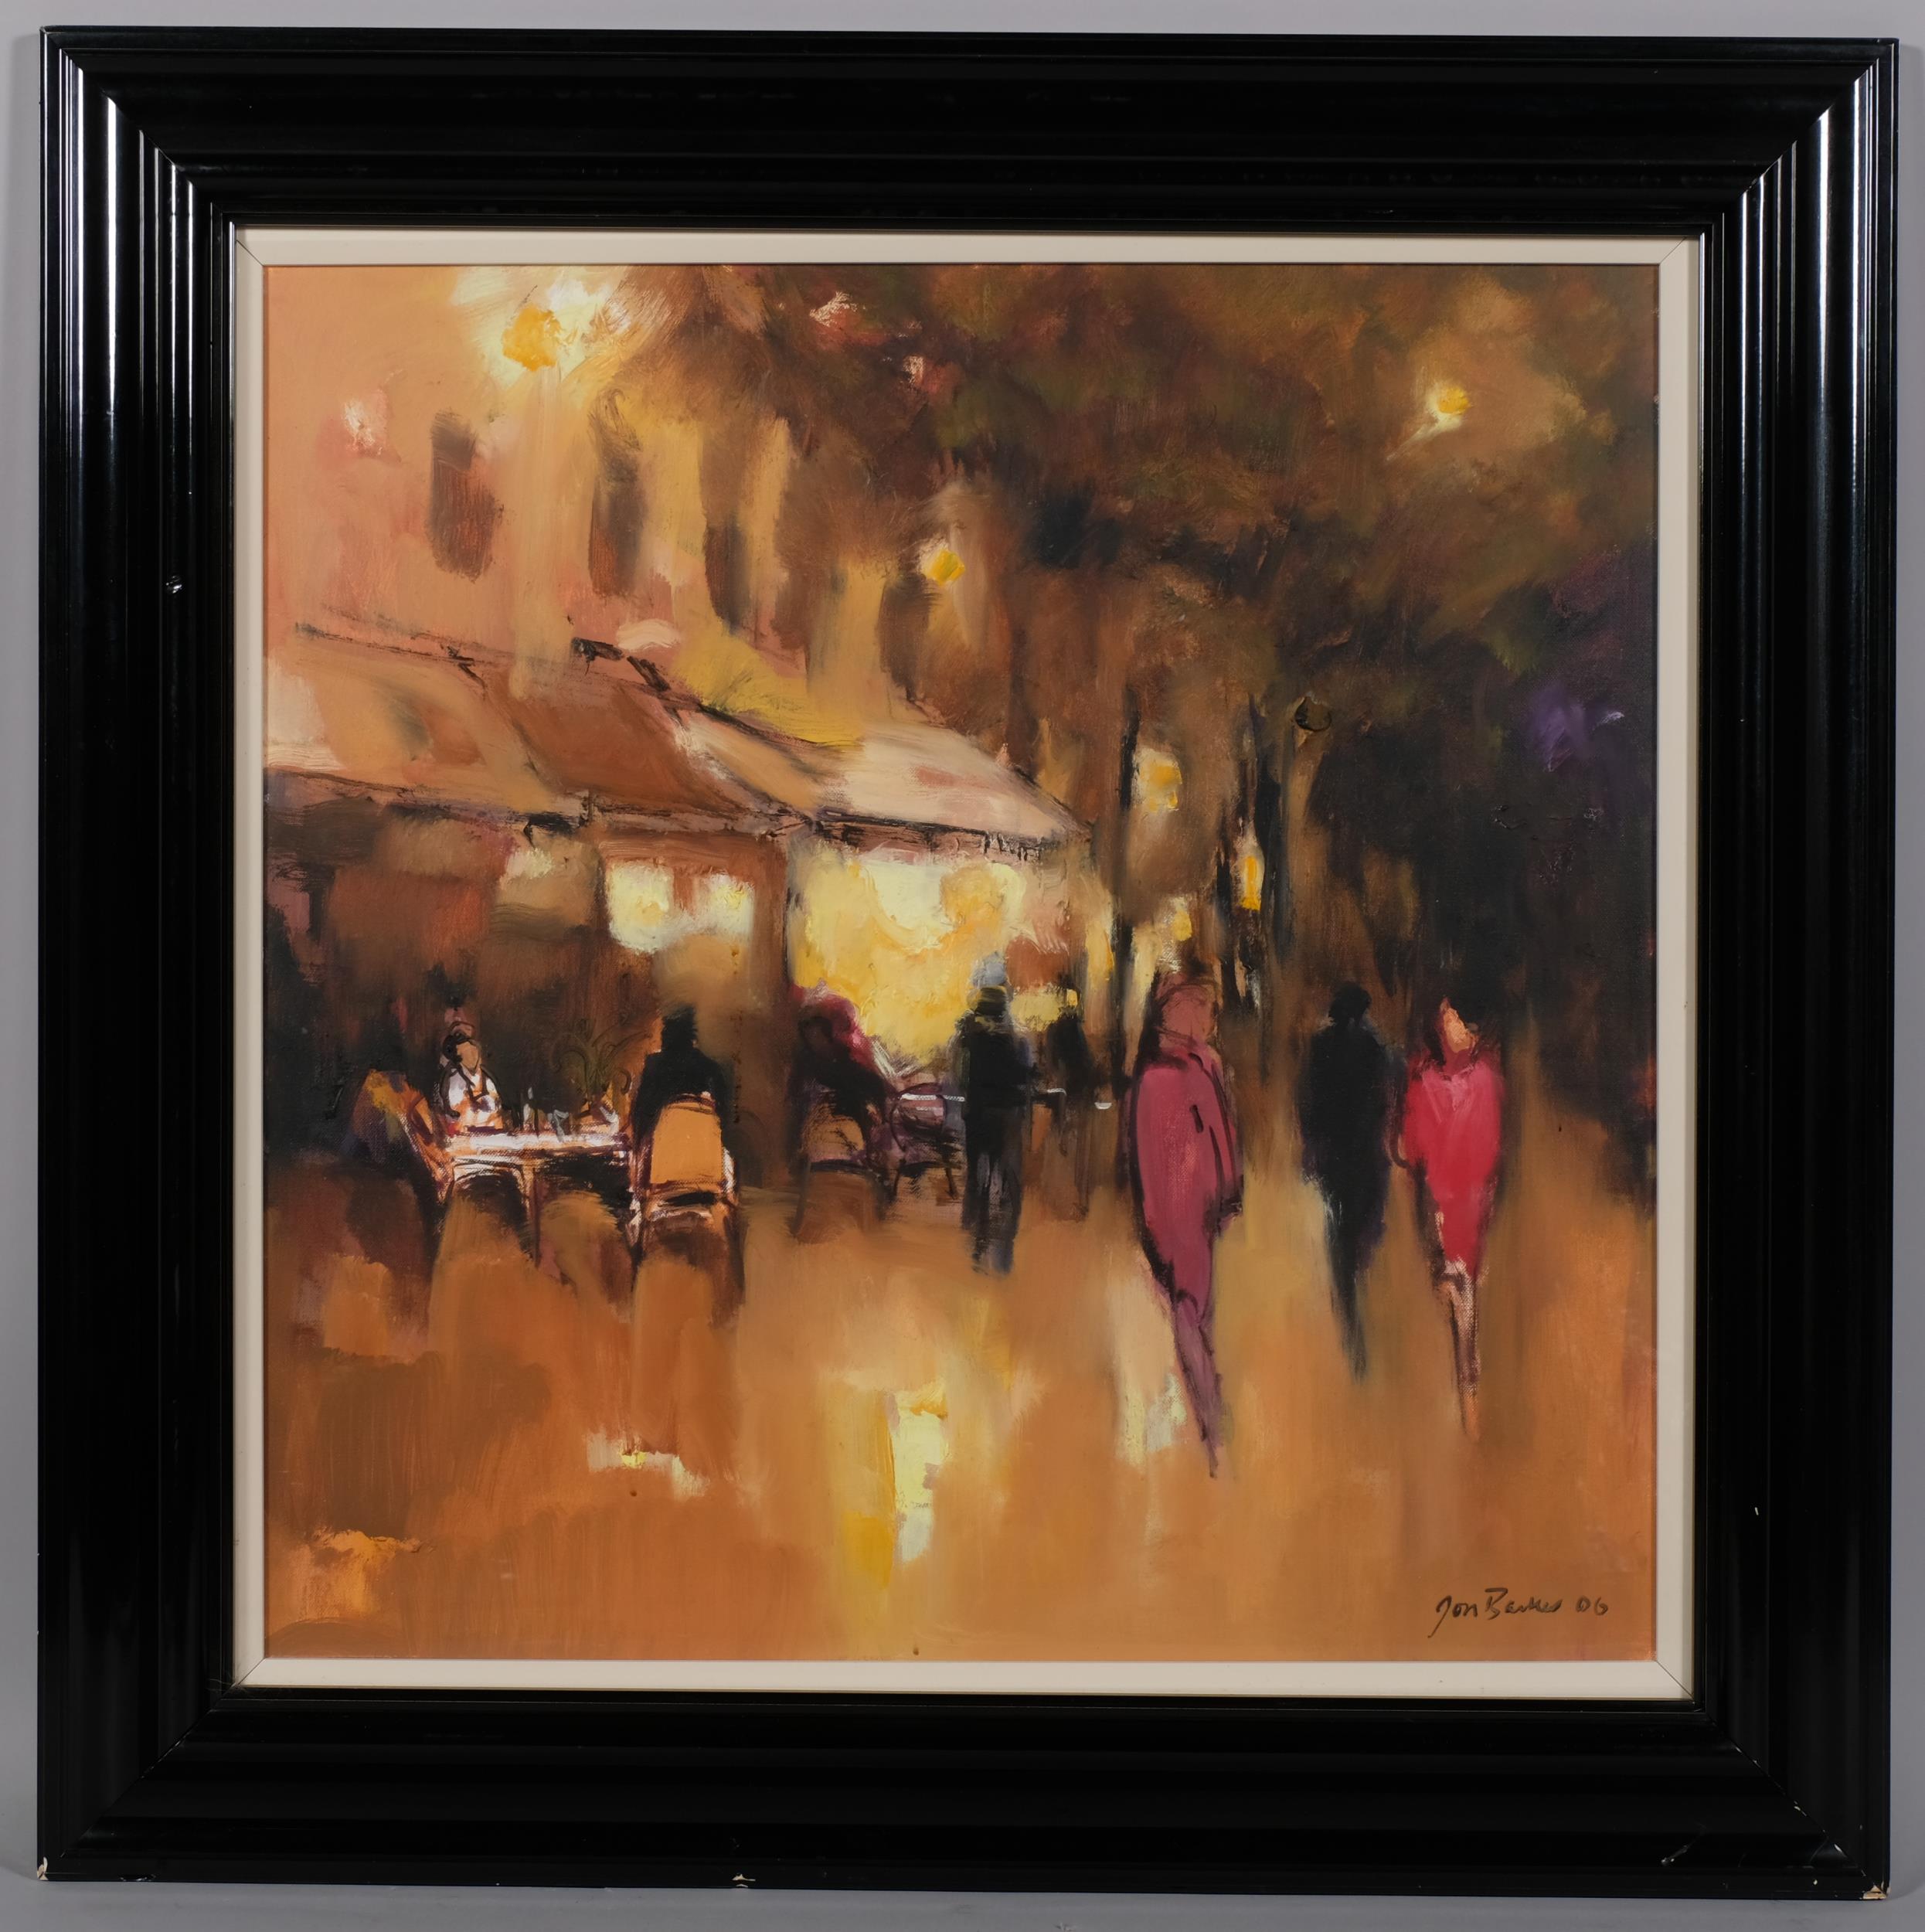 Jon Barker (born 1950), Continental street scene, oil on board, signed and dated 2006, framed and - Image 2 of 4